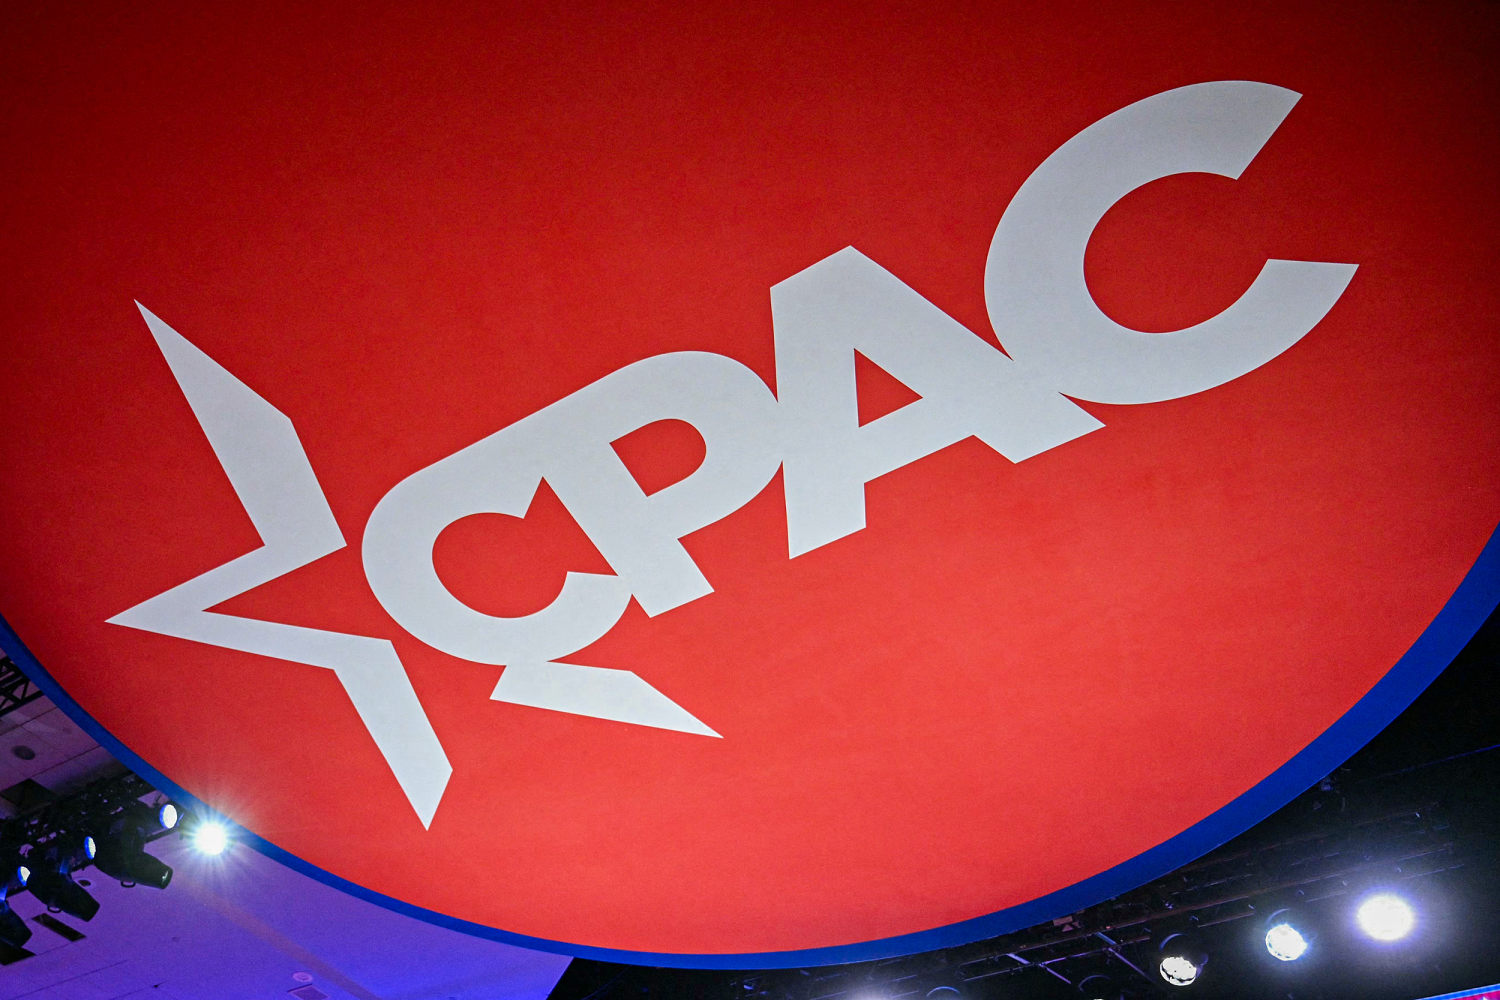 Nazis mingle openly at CPAC, spreading antisemitic conspiracy theories and finding allies